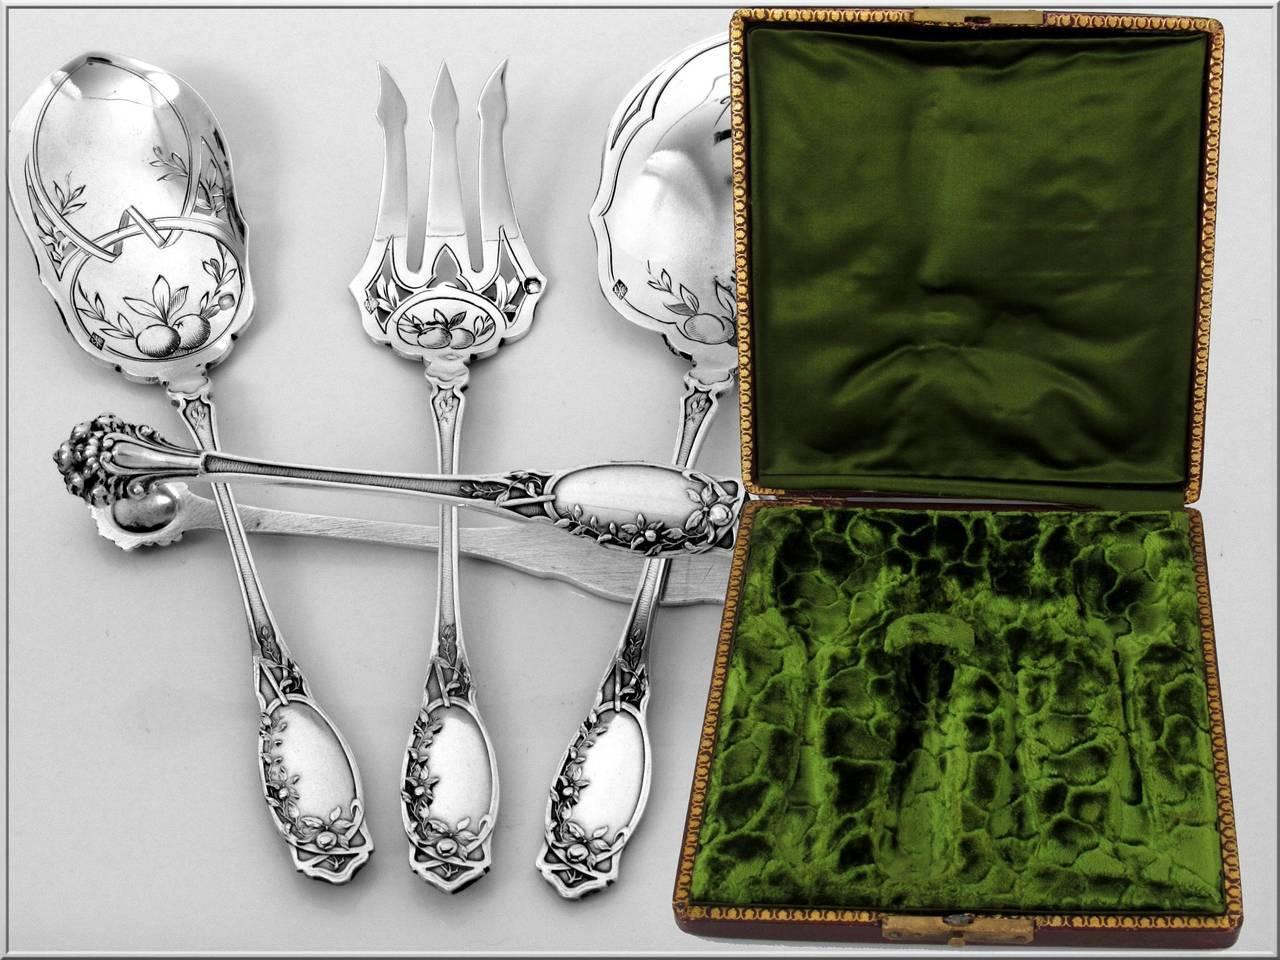 Coignet French All Sterling Silver Dessert Hors D'oeuvre Set Box Apples 2